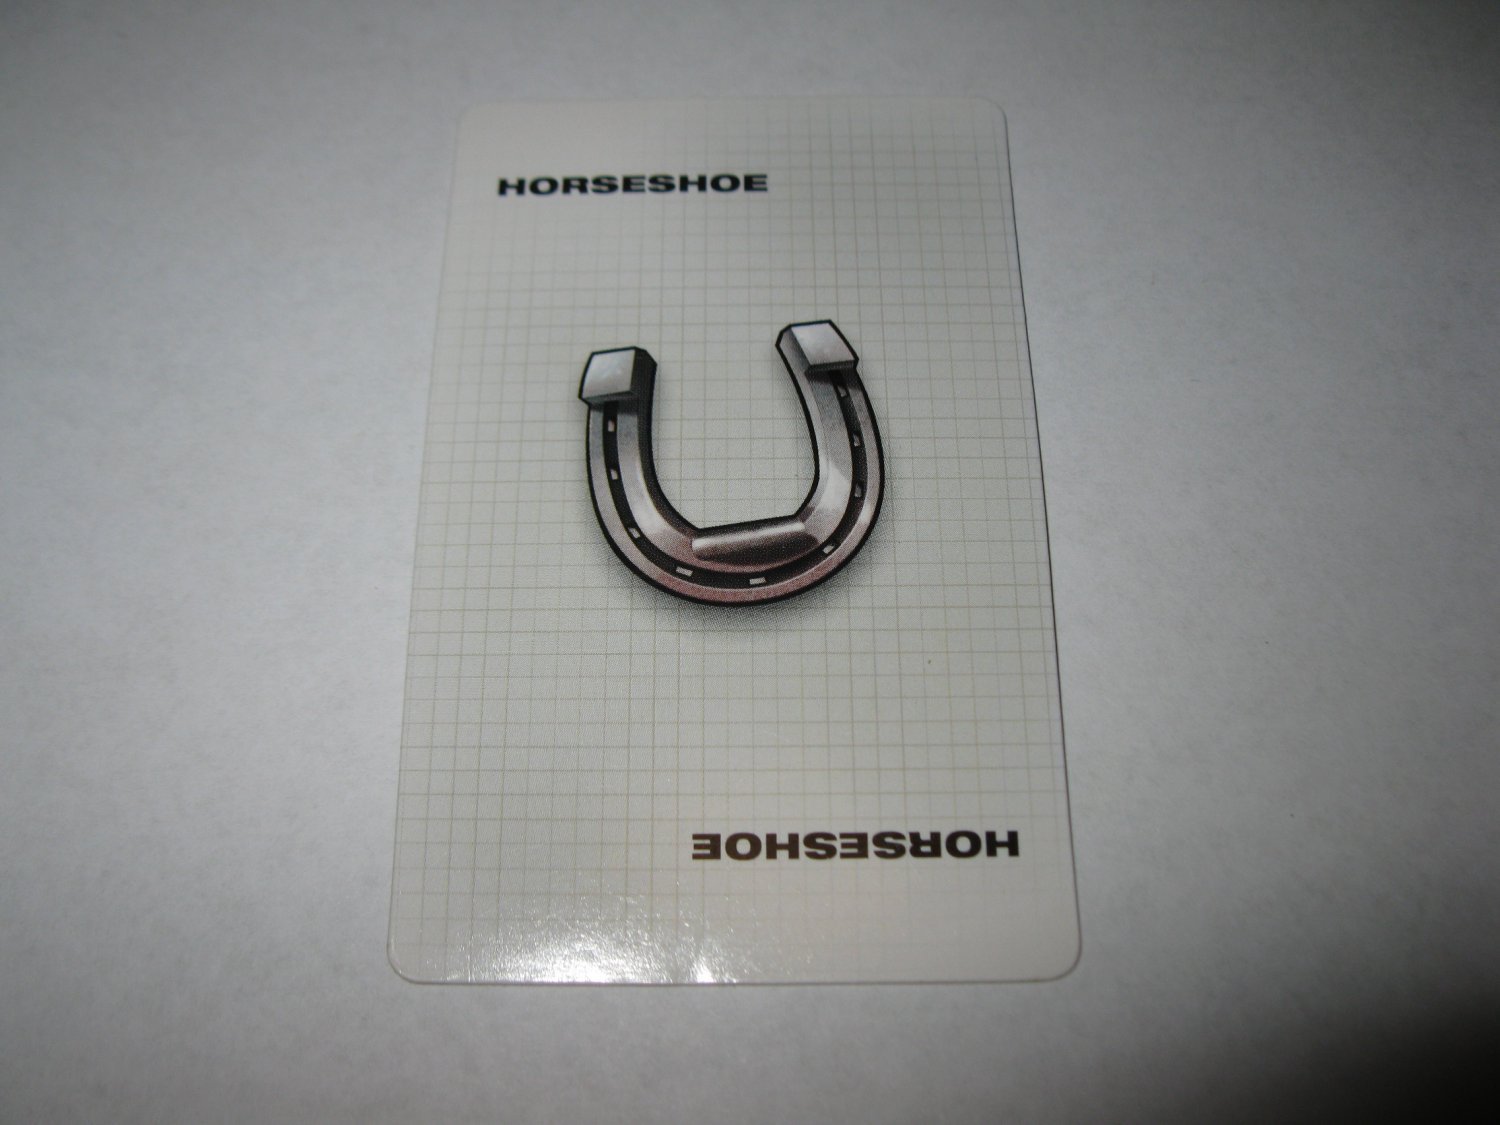 Primary image for 2003 Clue FX Board Game Piece: Horseshoe Weapon Card